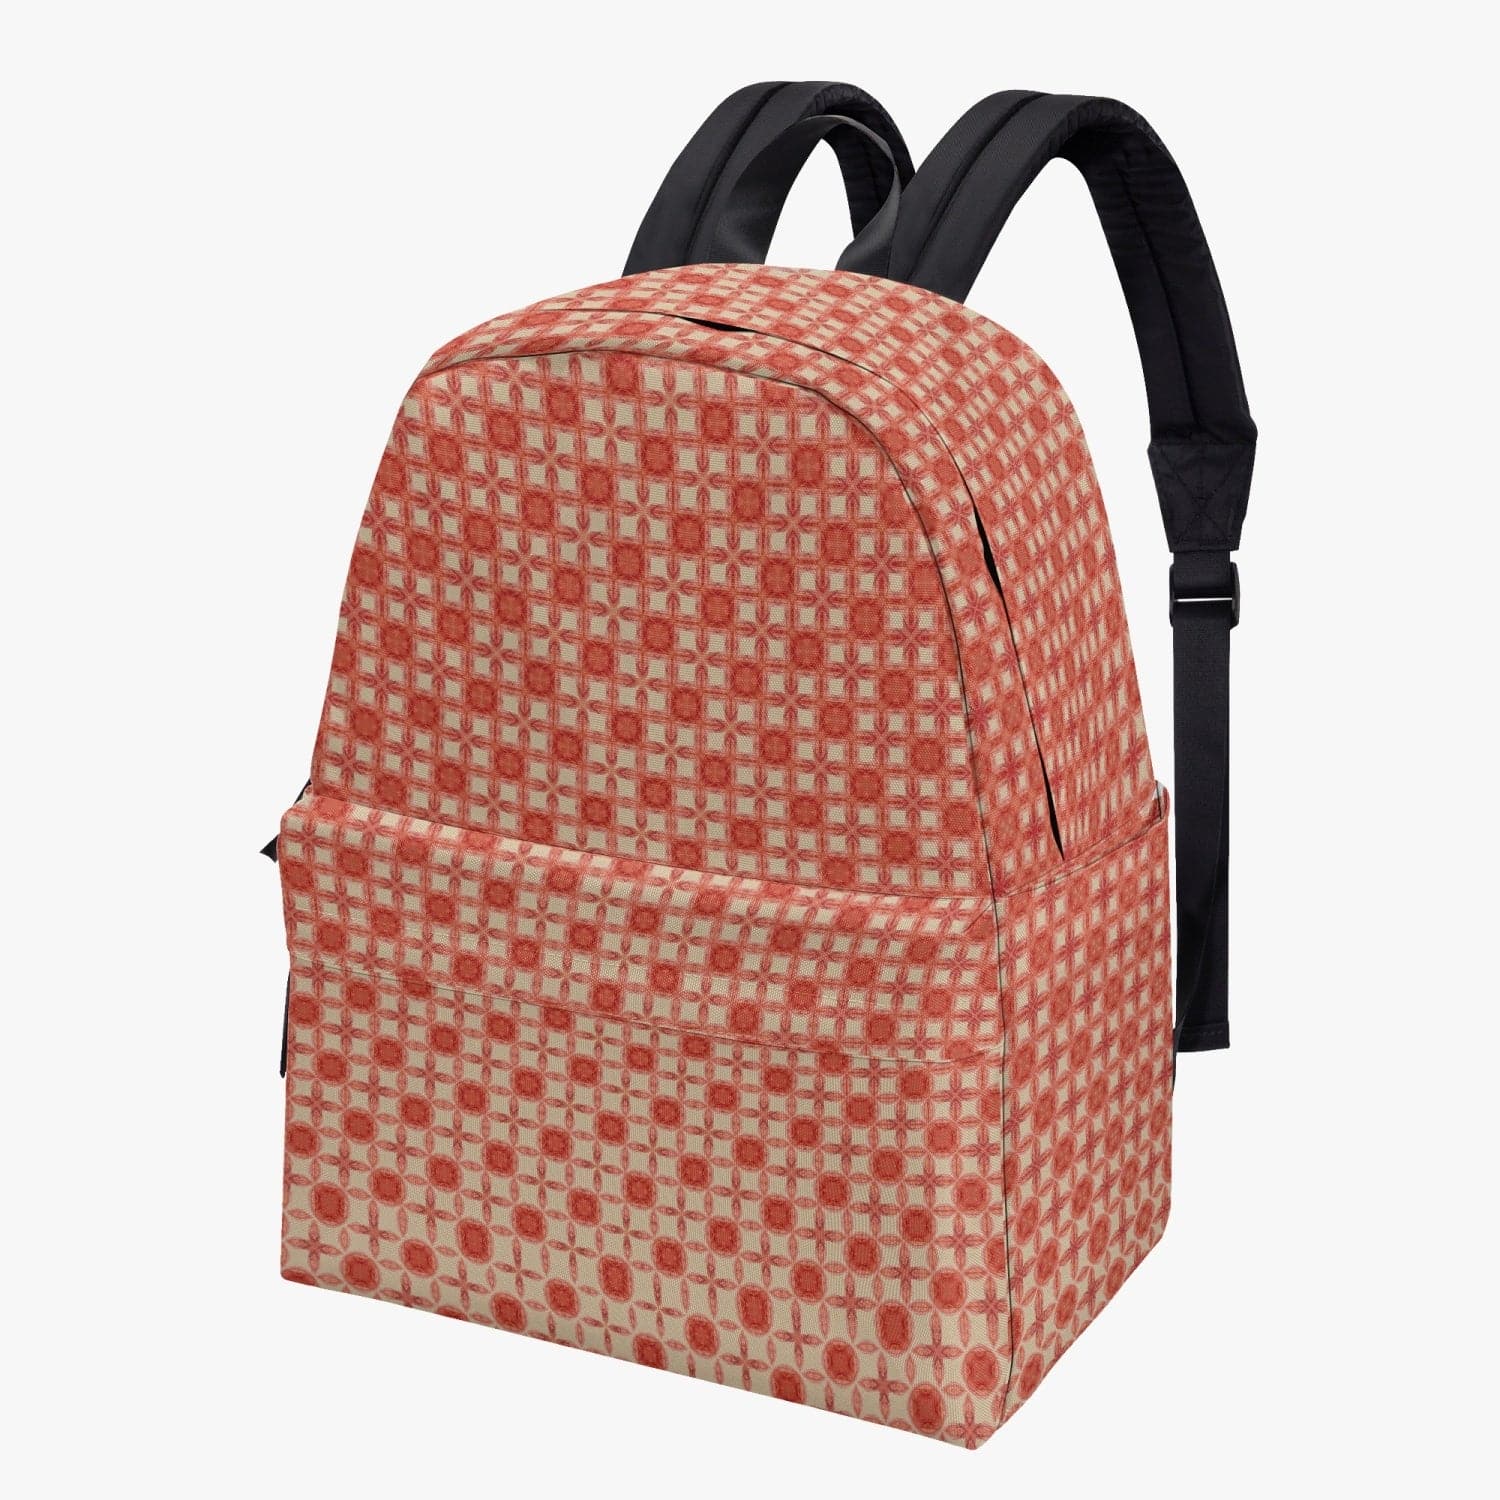 Red Buttercup fine patterned Cotton Canvas Backpack, by Sensus Studio Design